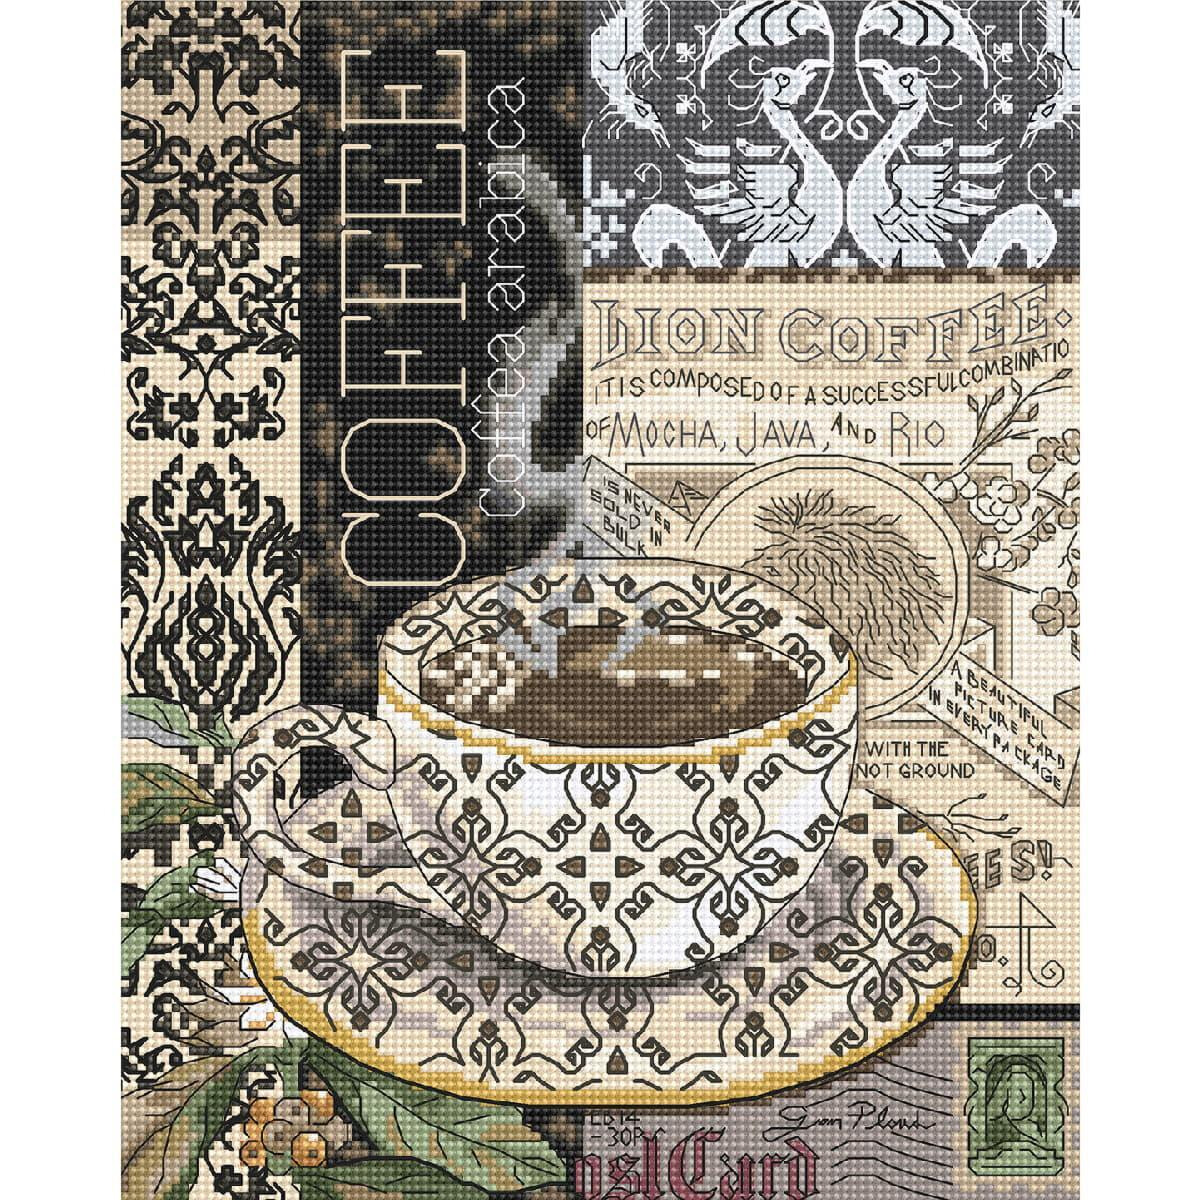 A collage shows a vintage-style coffee cup with intricate...